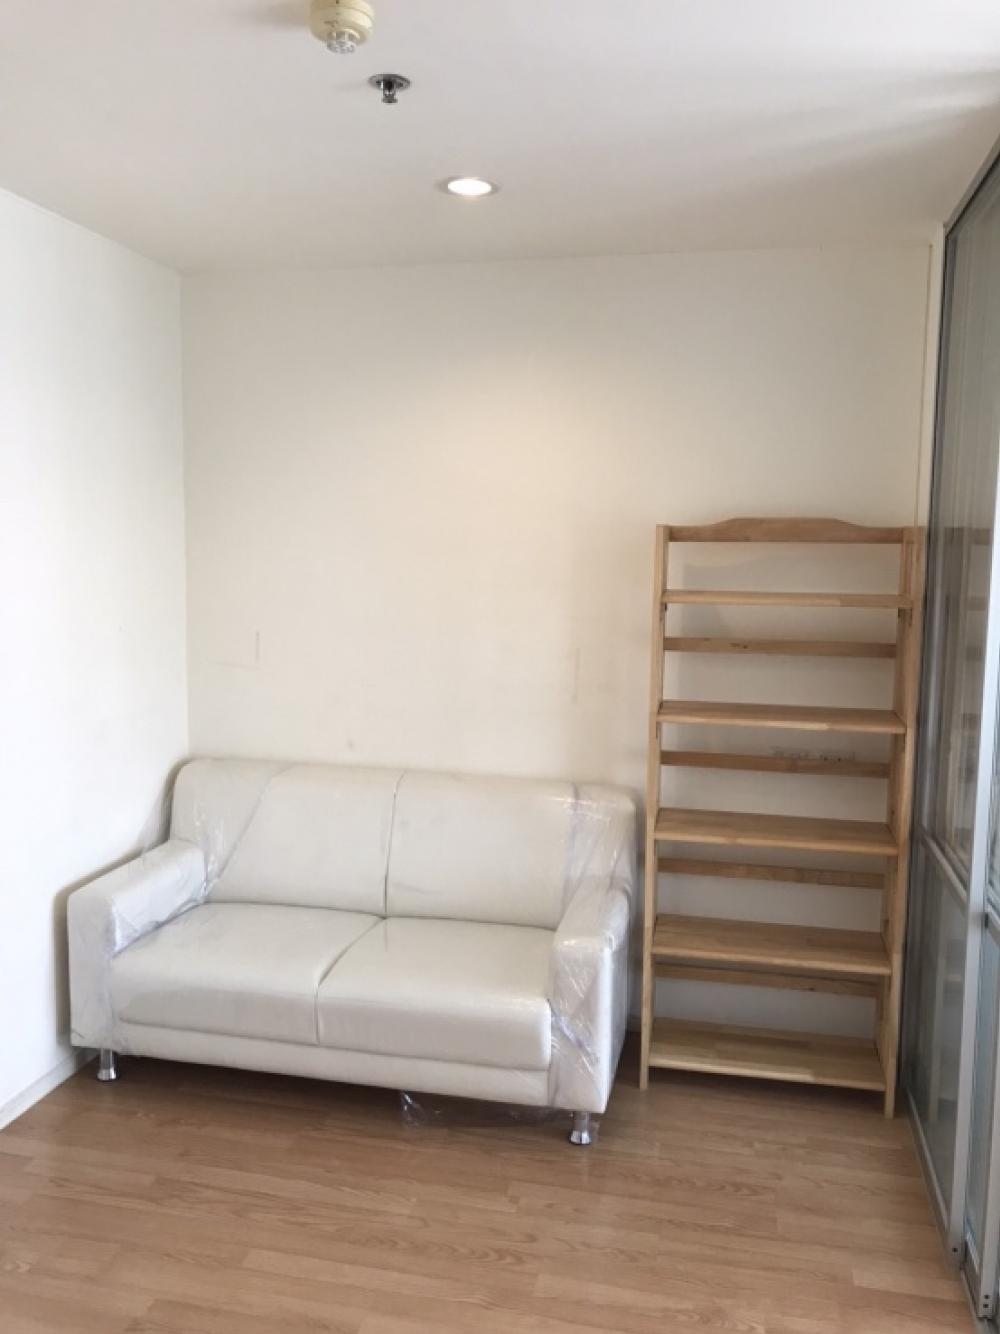 For RentCondoSeri Thai, Ramkhamhaeng Nida : Urgent for rent, Lumpini Ville Ramkhamhaeng 60/2 (Lumpini Ville Ramkhamhaeng 60/2), property code #KK249. If interested, contact @condo19 (with @ as well). Want to ask for details and see more pictures. Please contact and inquire.